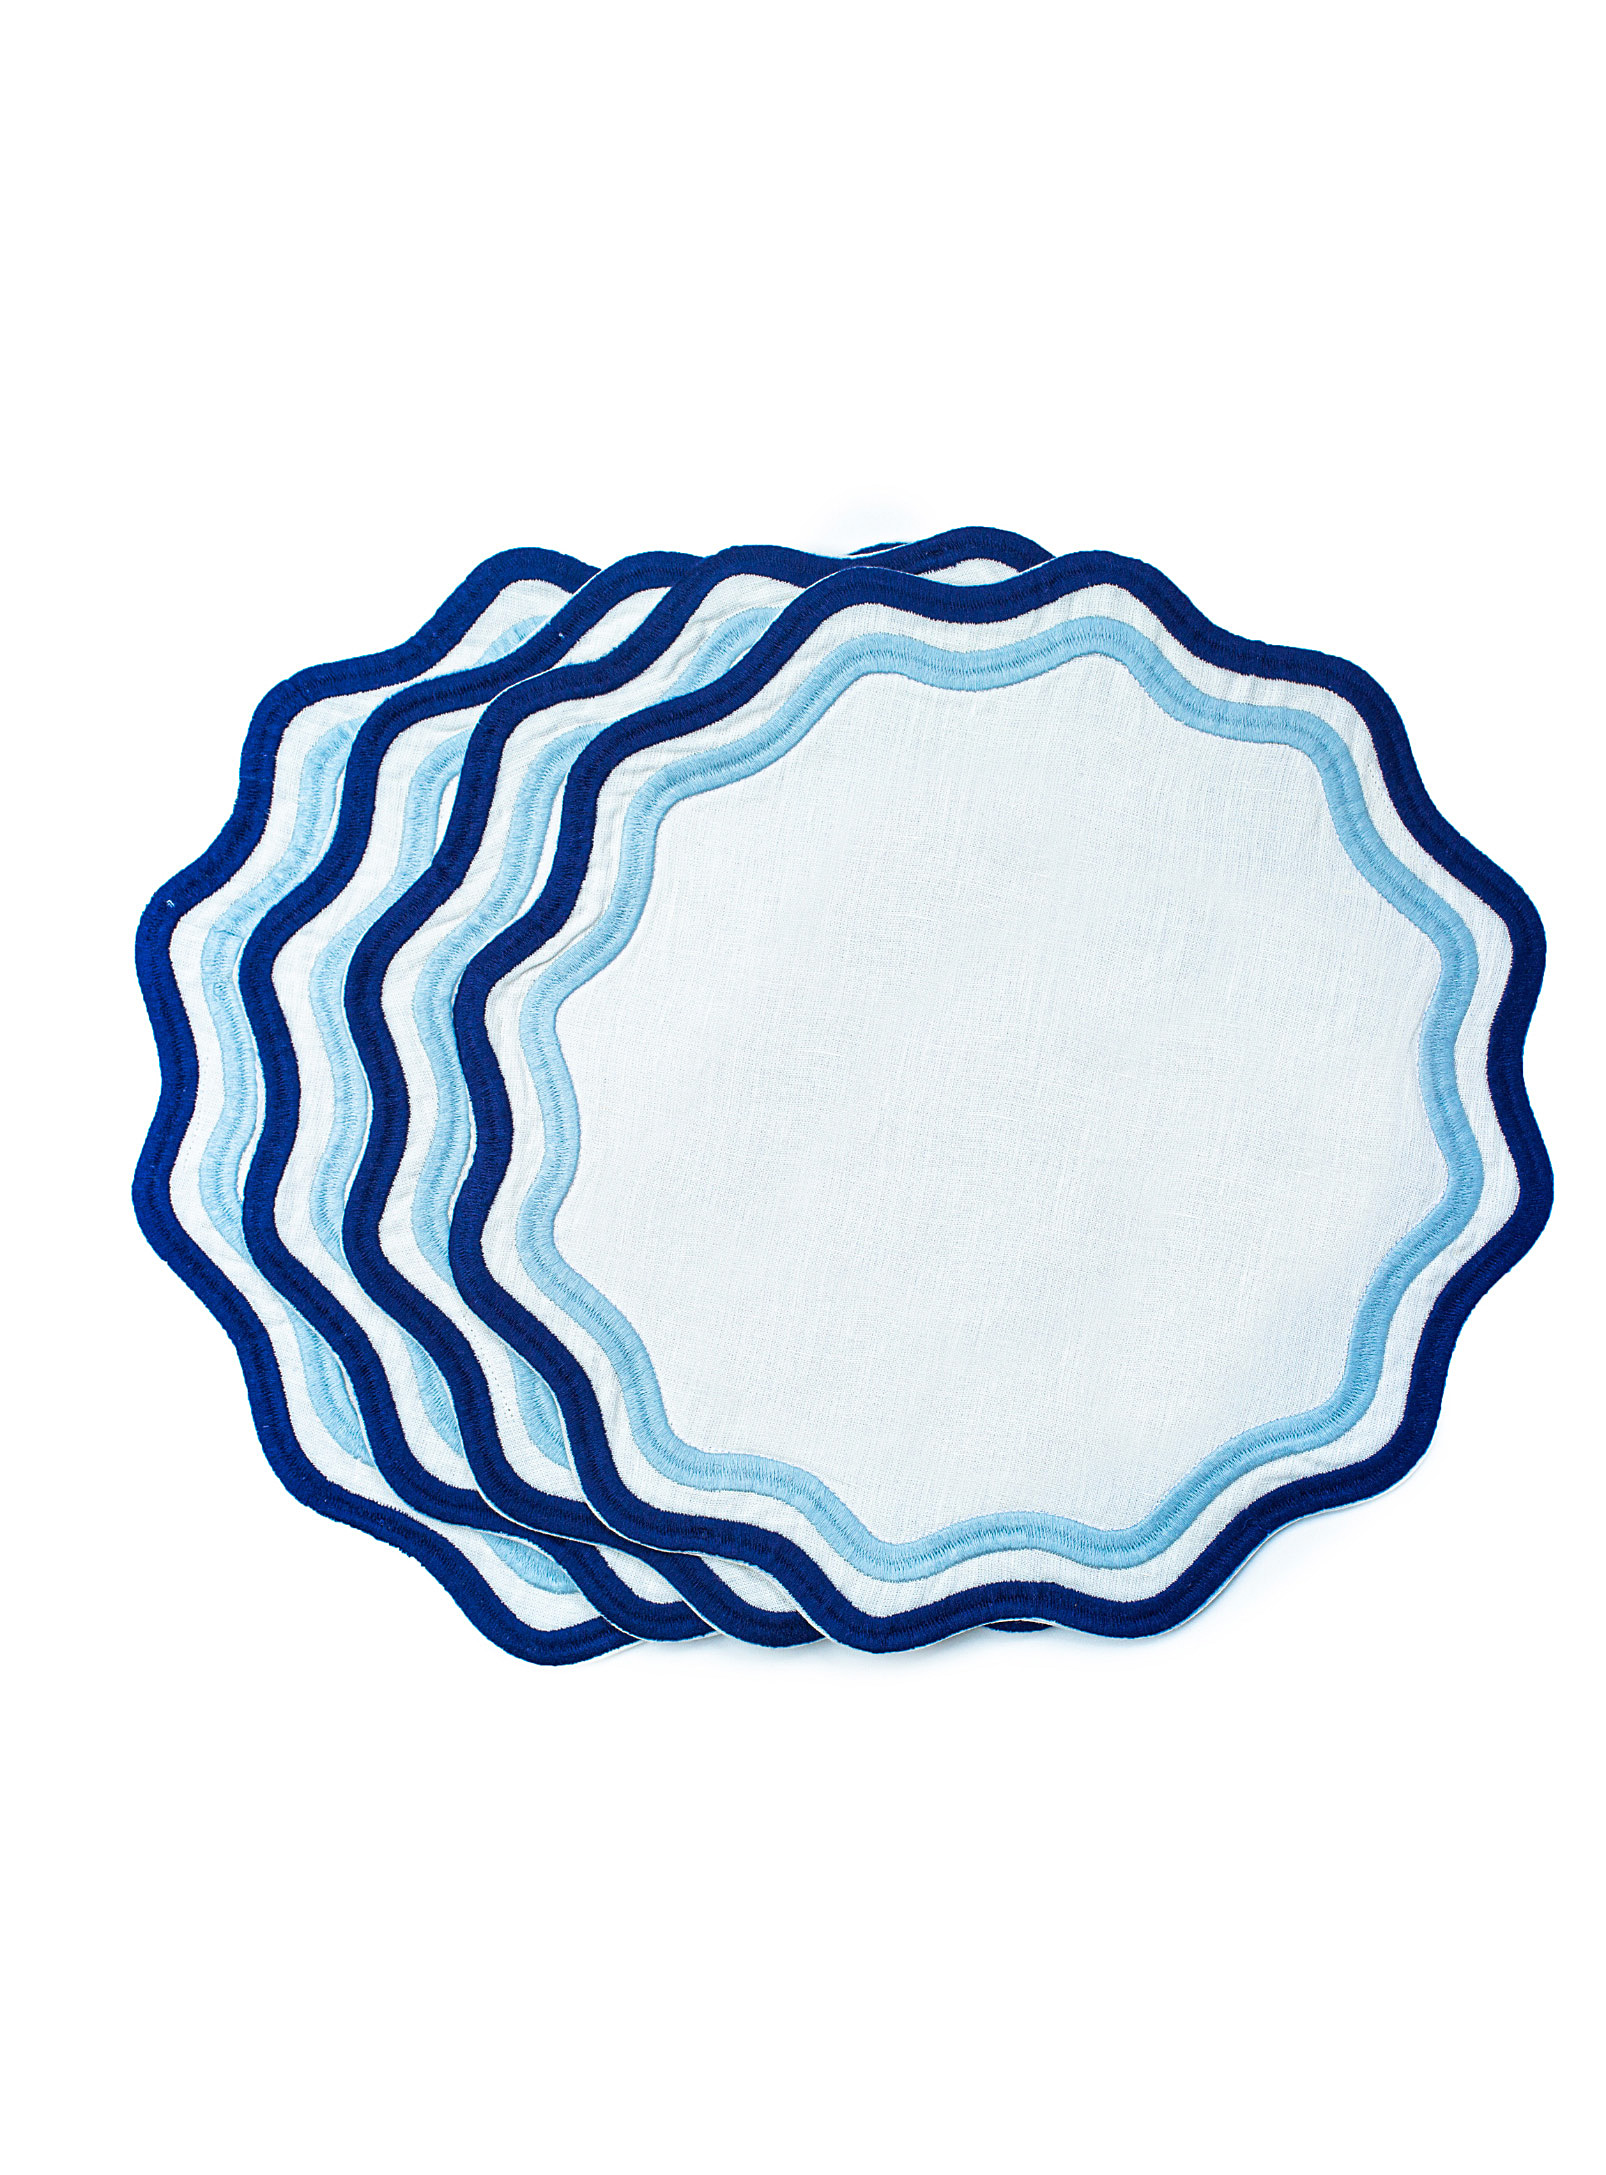 Misette Contrasting Trim Wavy Placemats Set Of 4 In Marine Blue